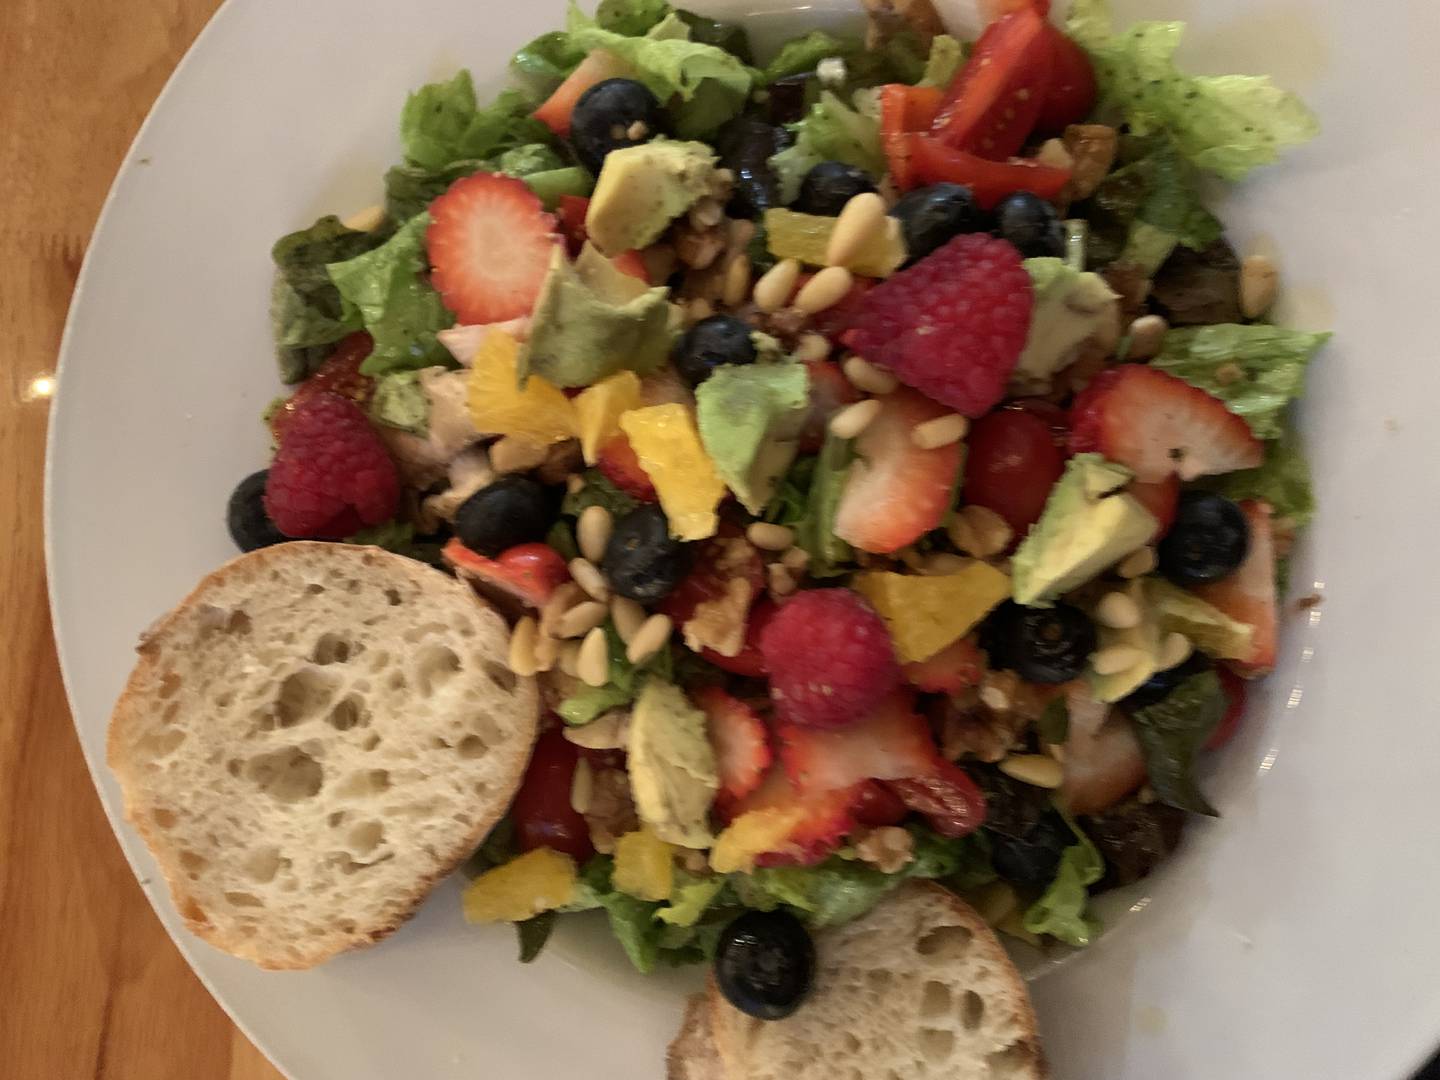 The Garden of Eatin’ Salad, which includes red leaf and spring mix lettuce, tomato, mushrooms, sweet peppers, avocado, onions, blue berries, strawberries, orange, pine nuts, walnuts and olive oil.